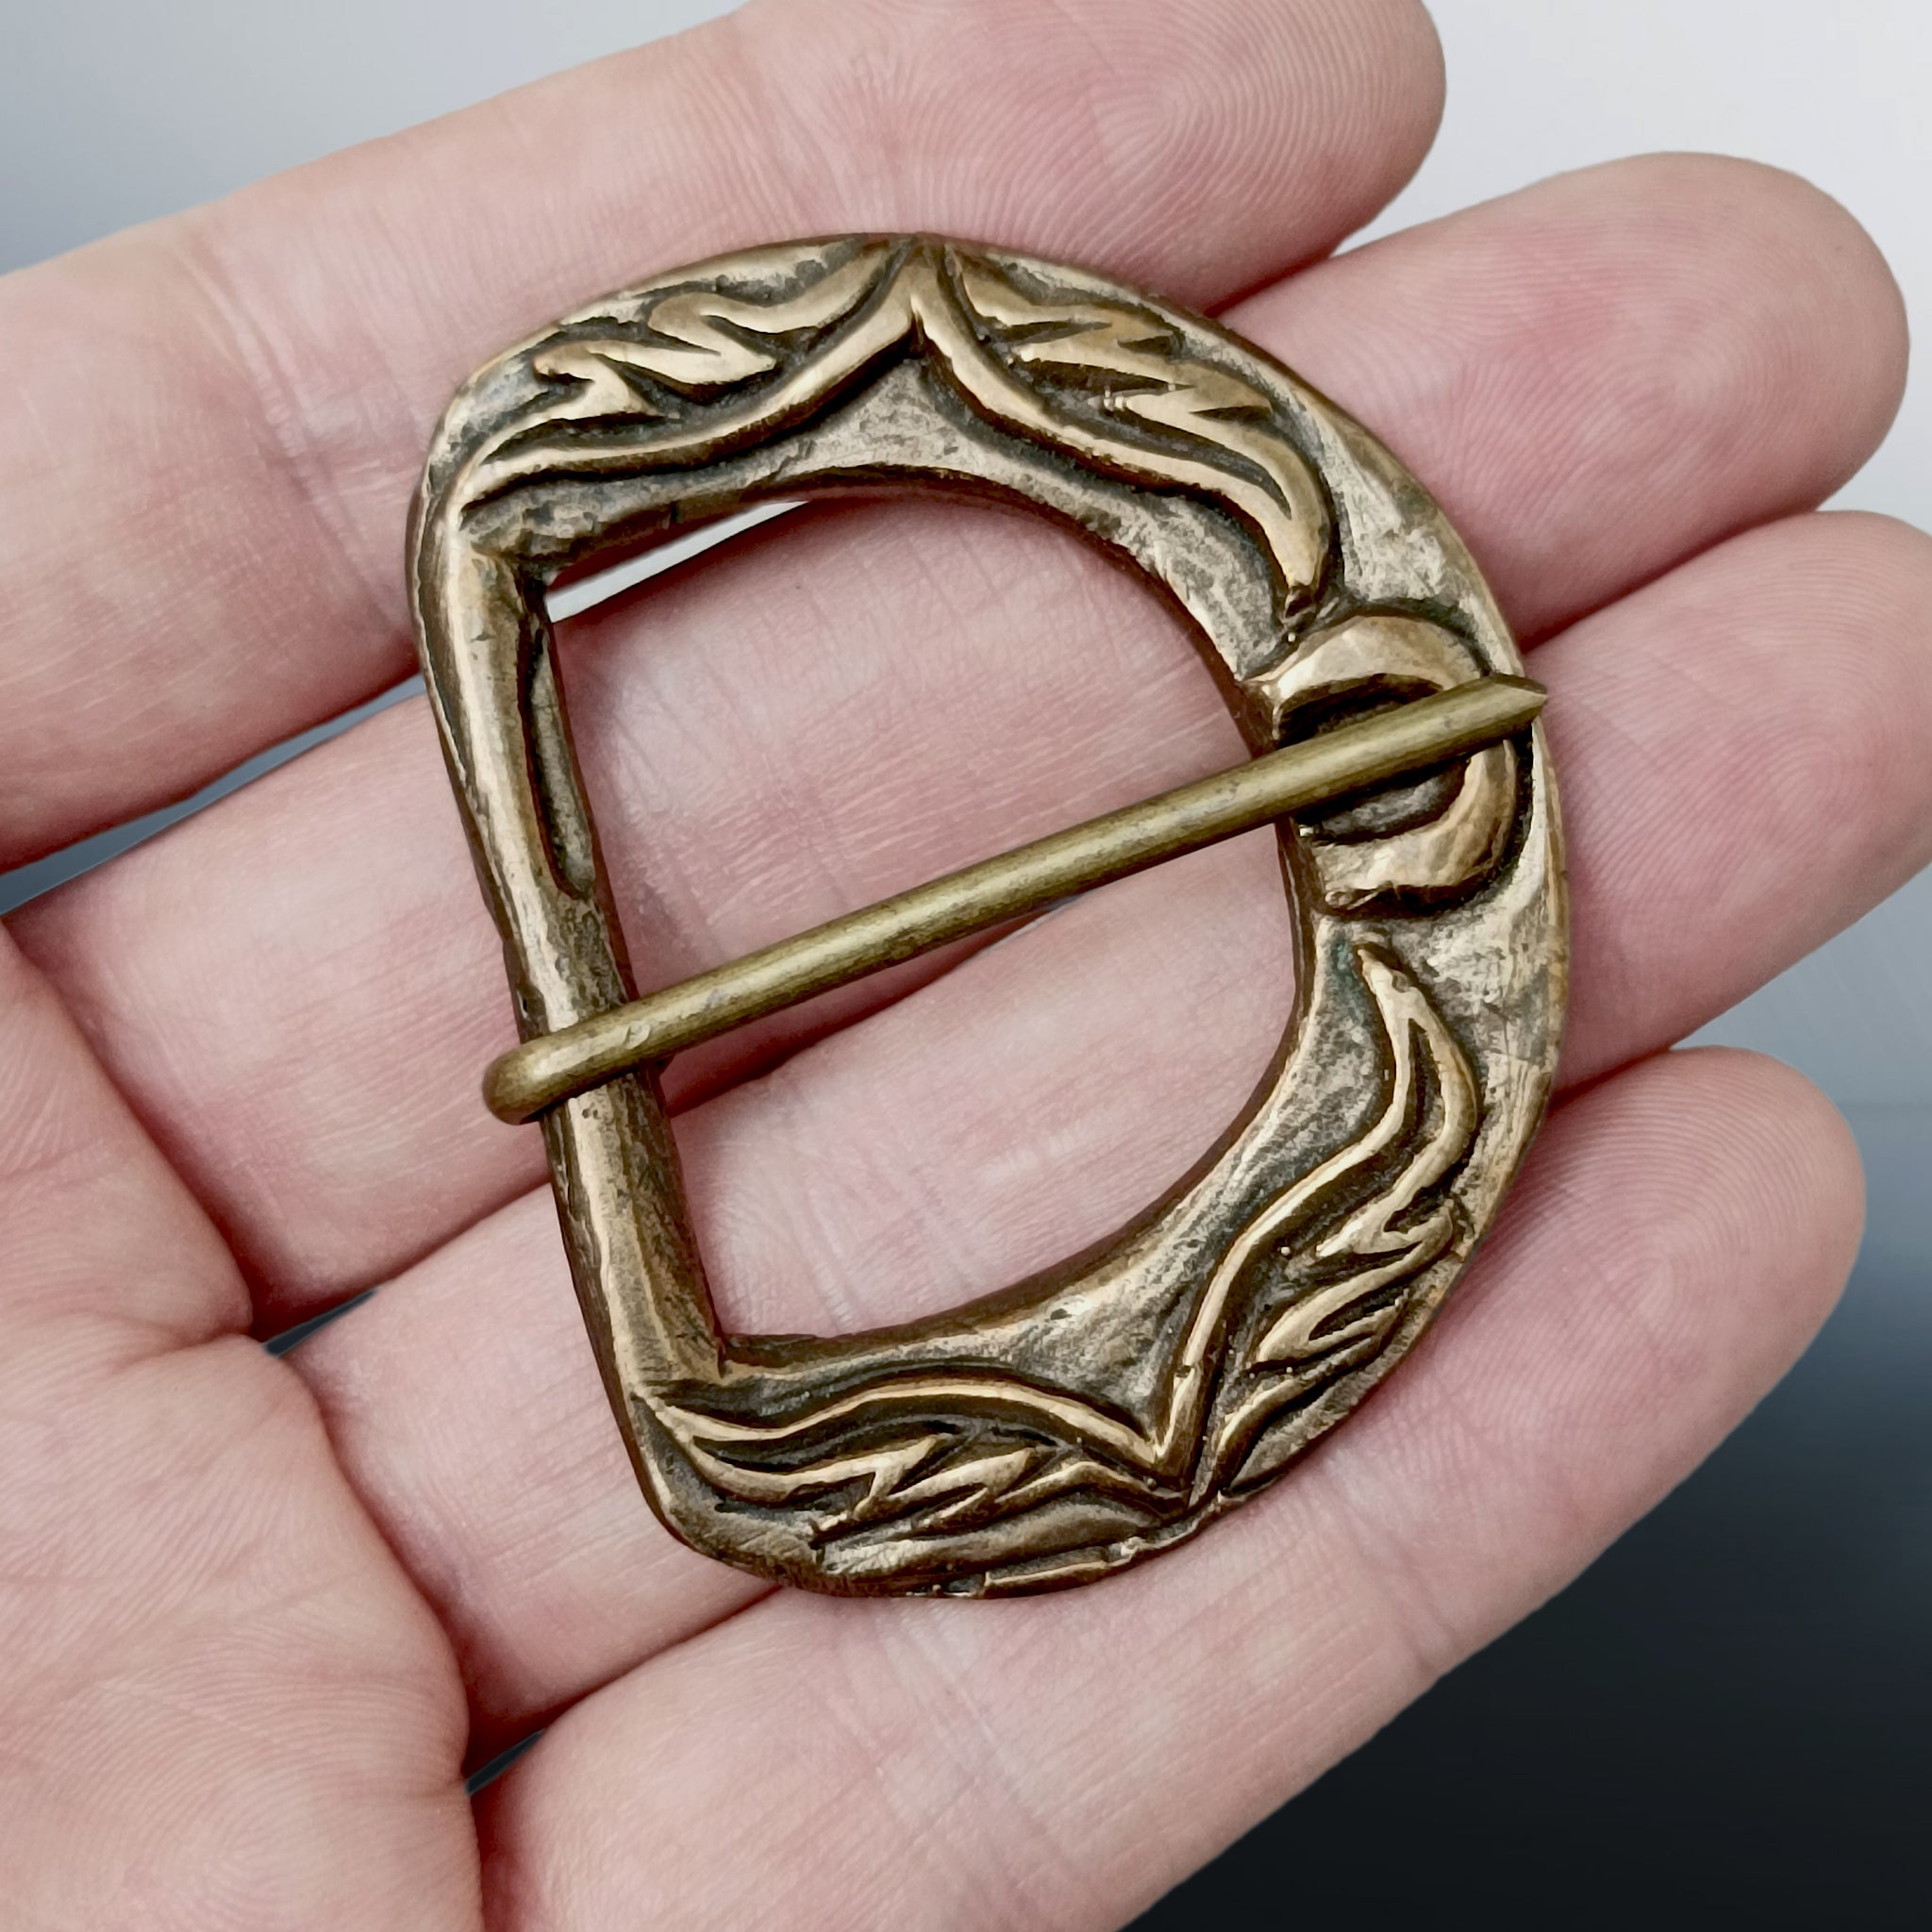 9th - 10th Century Bronze Viking Buckle from Ostra, Sweden - In Hand